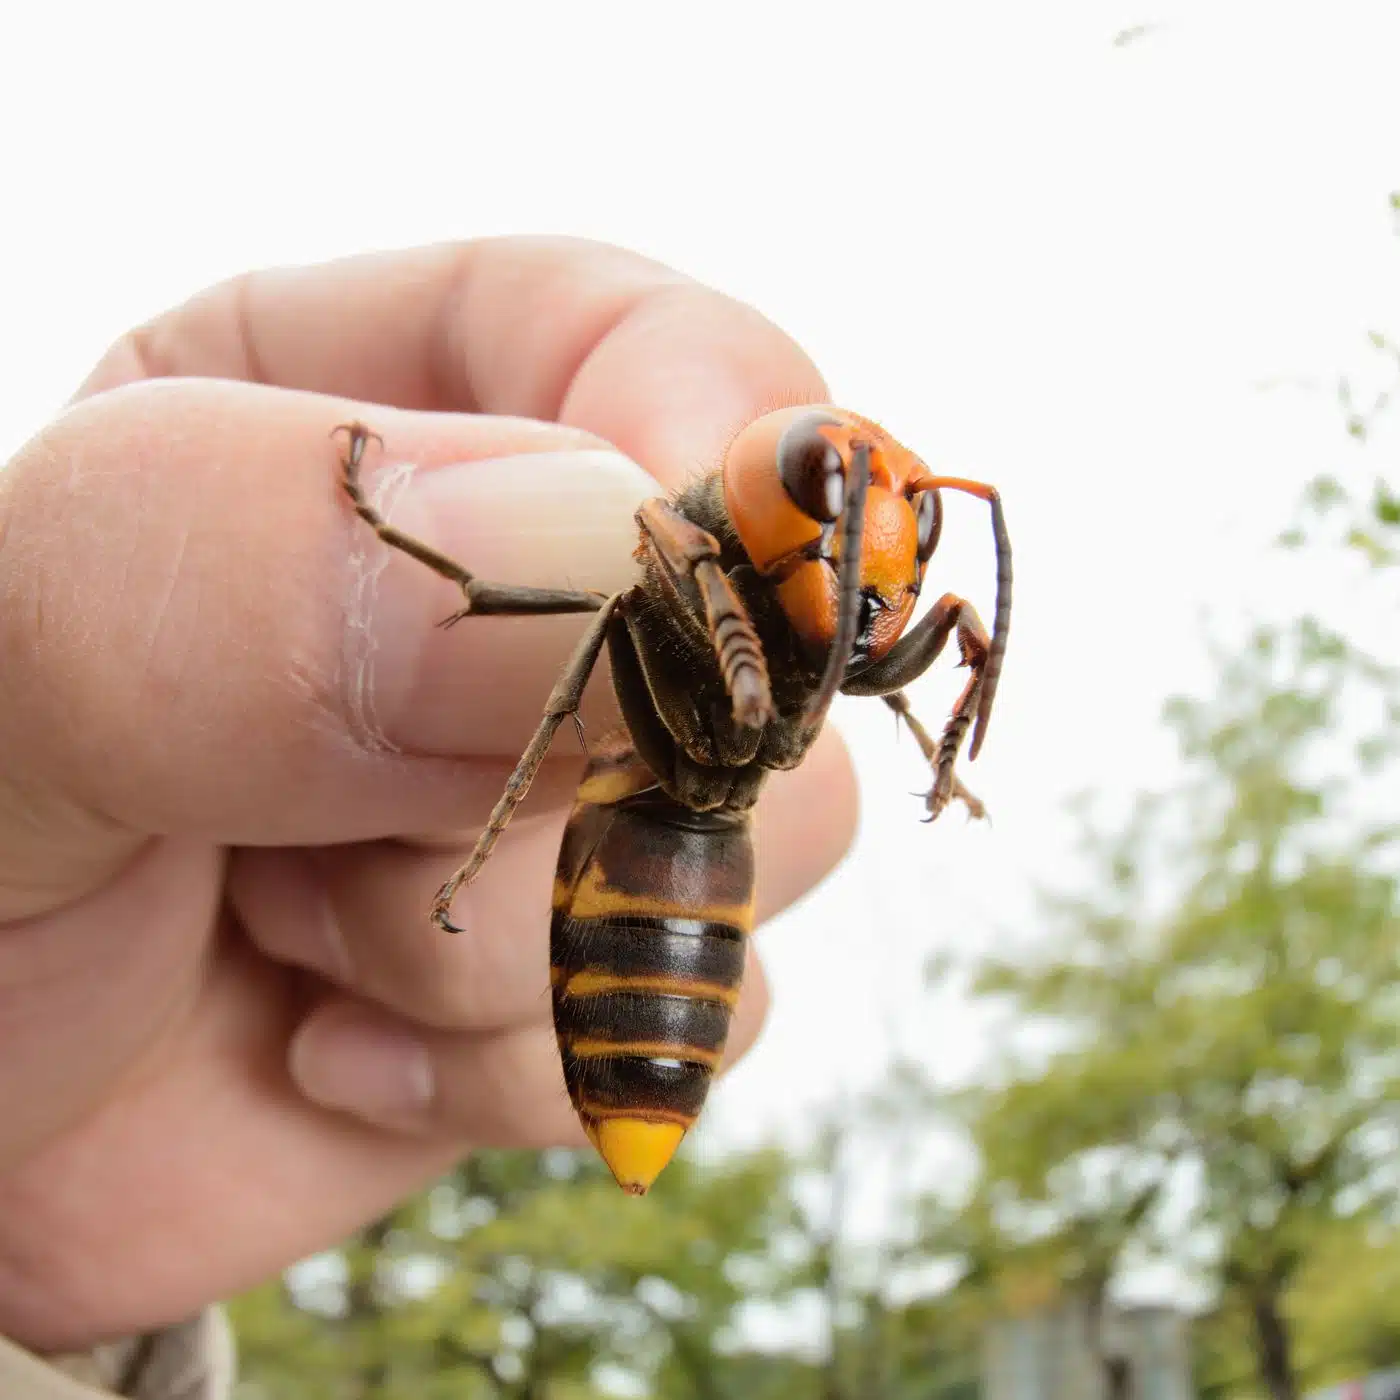 Asian 'giant hornets' have arrived in the U.S.